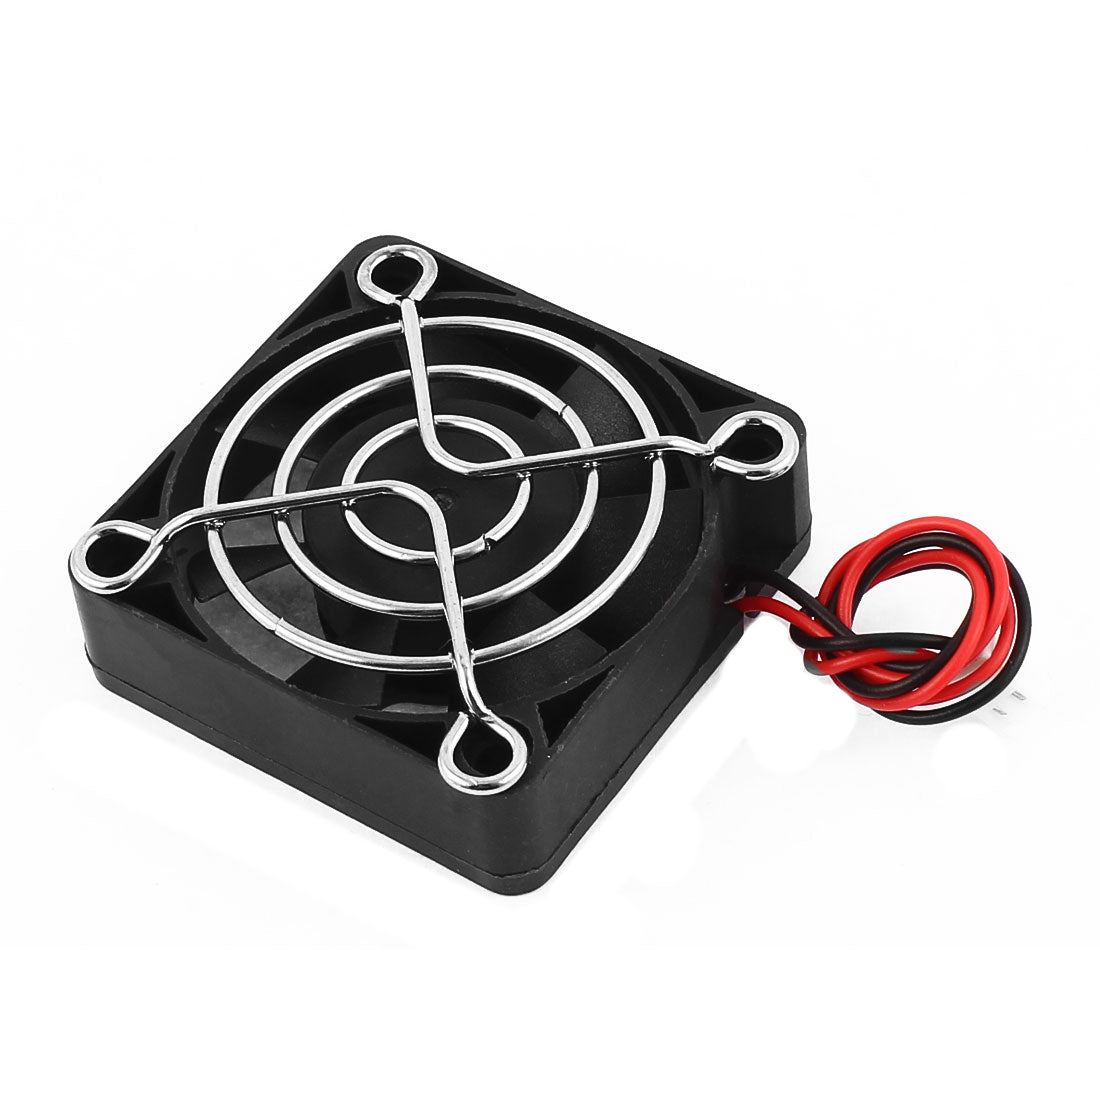 uxcell Uxcell DC 12V 0.12A 50mmx50mmx15mm 7 Vanes PC CPU Computer Cooling Fan w Metal Mesh